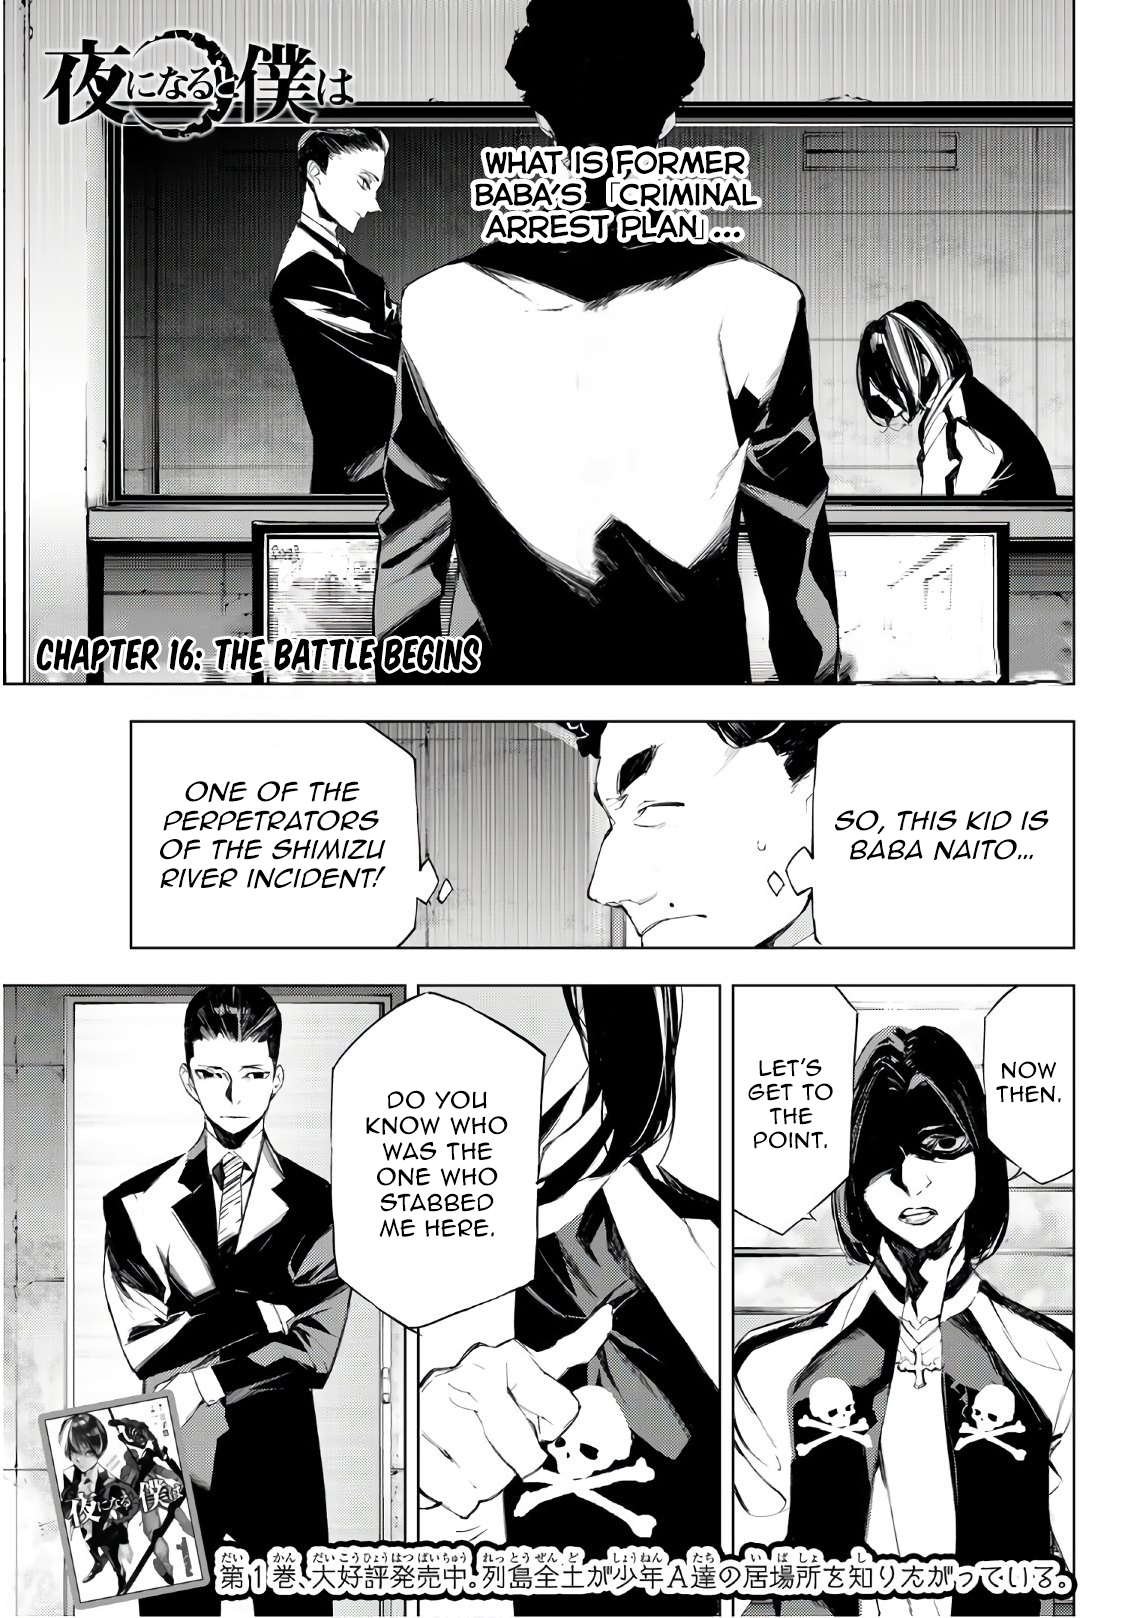 When Night Falls Vol.3 Chapter 16: The Battle Begins - Picture 1